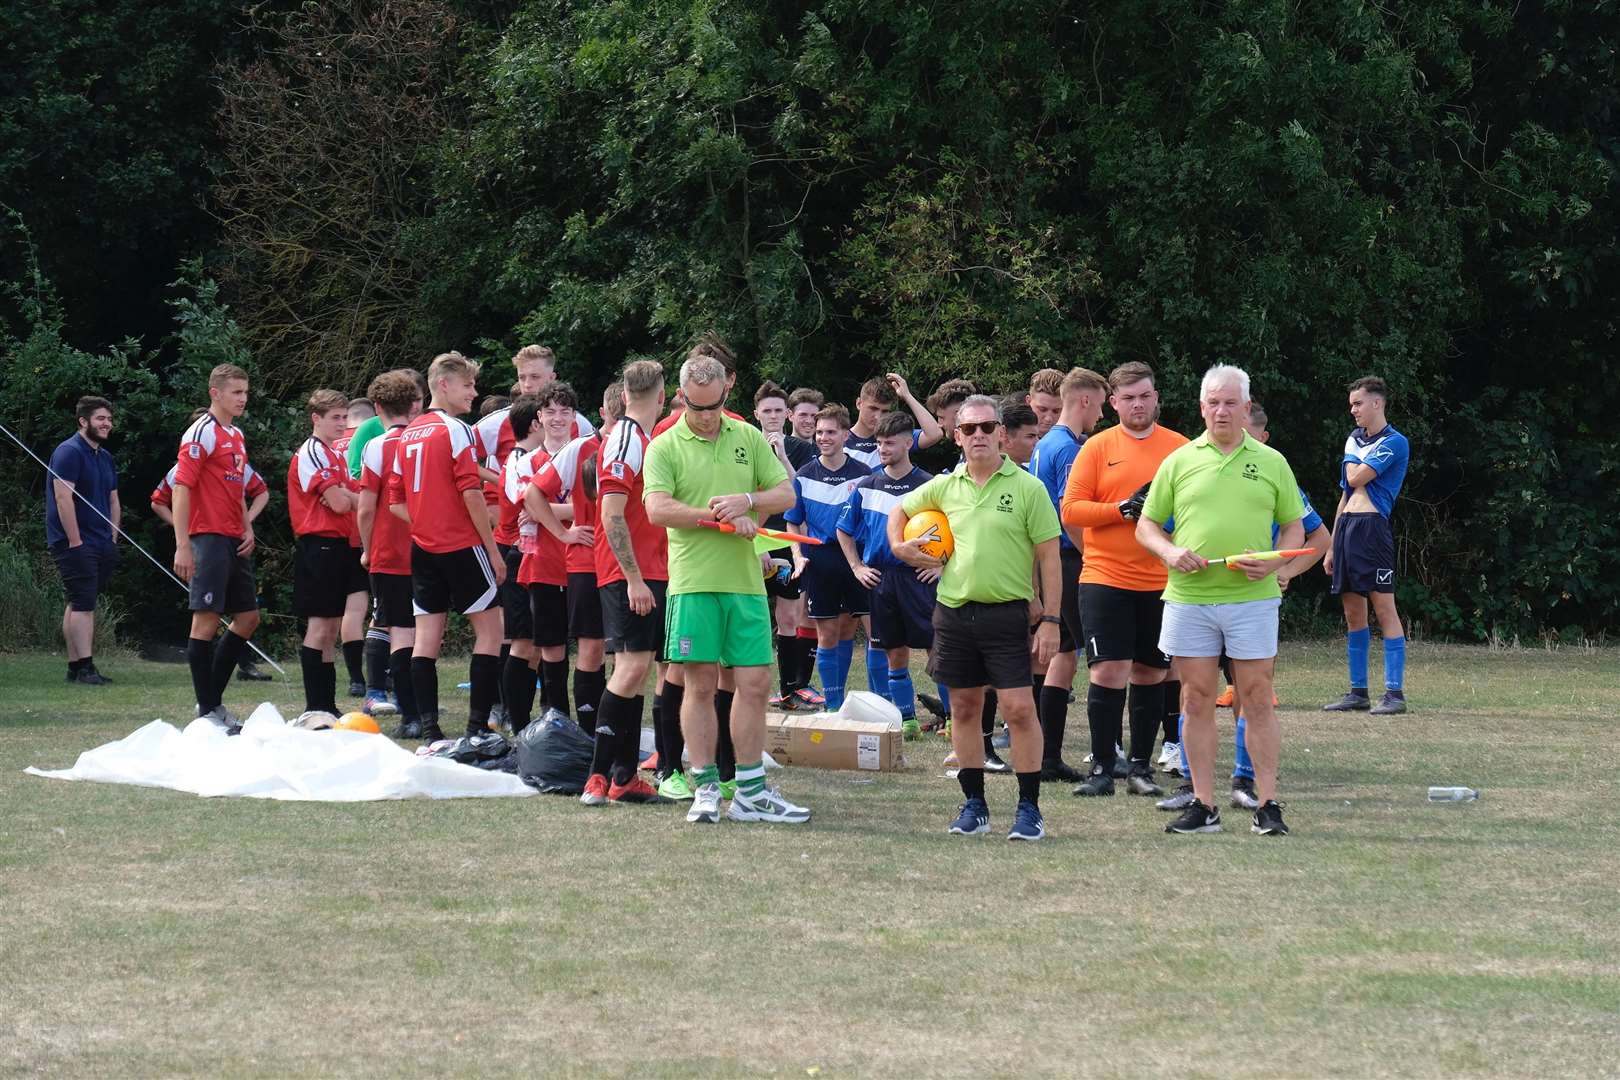 A charity football match was held at Istead Rise recreational ground in memory of Elliott Holmes